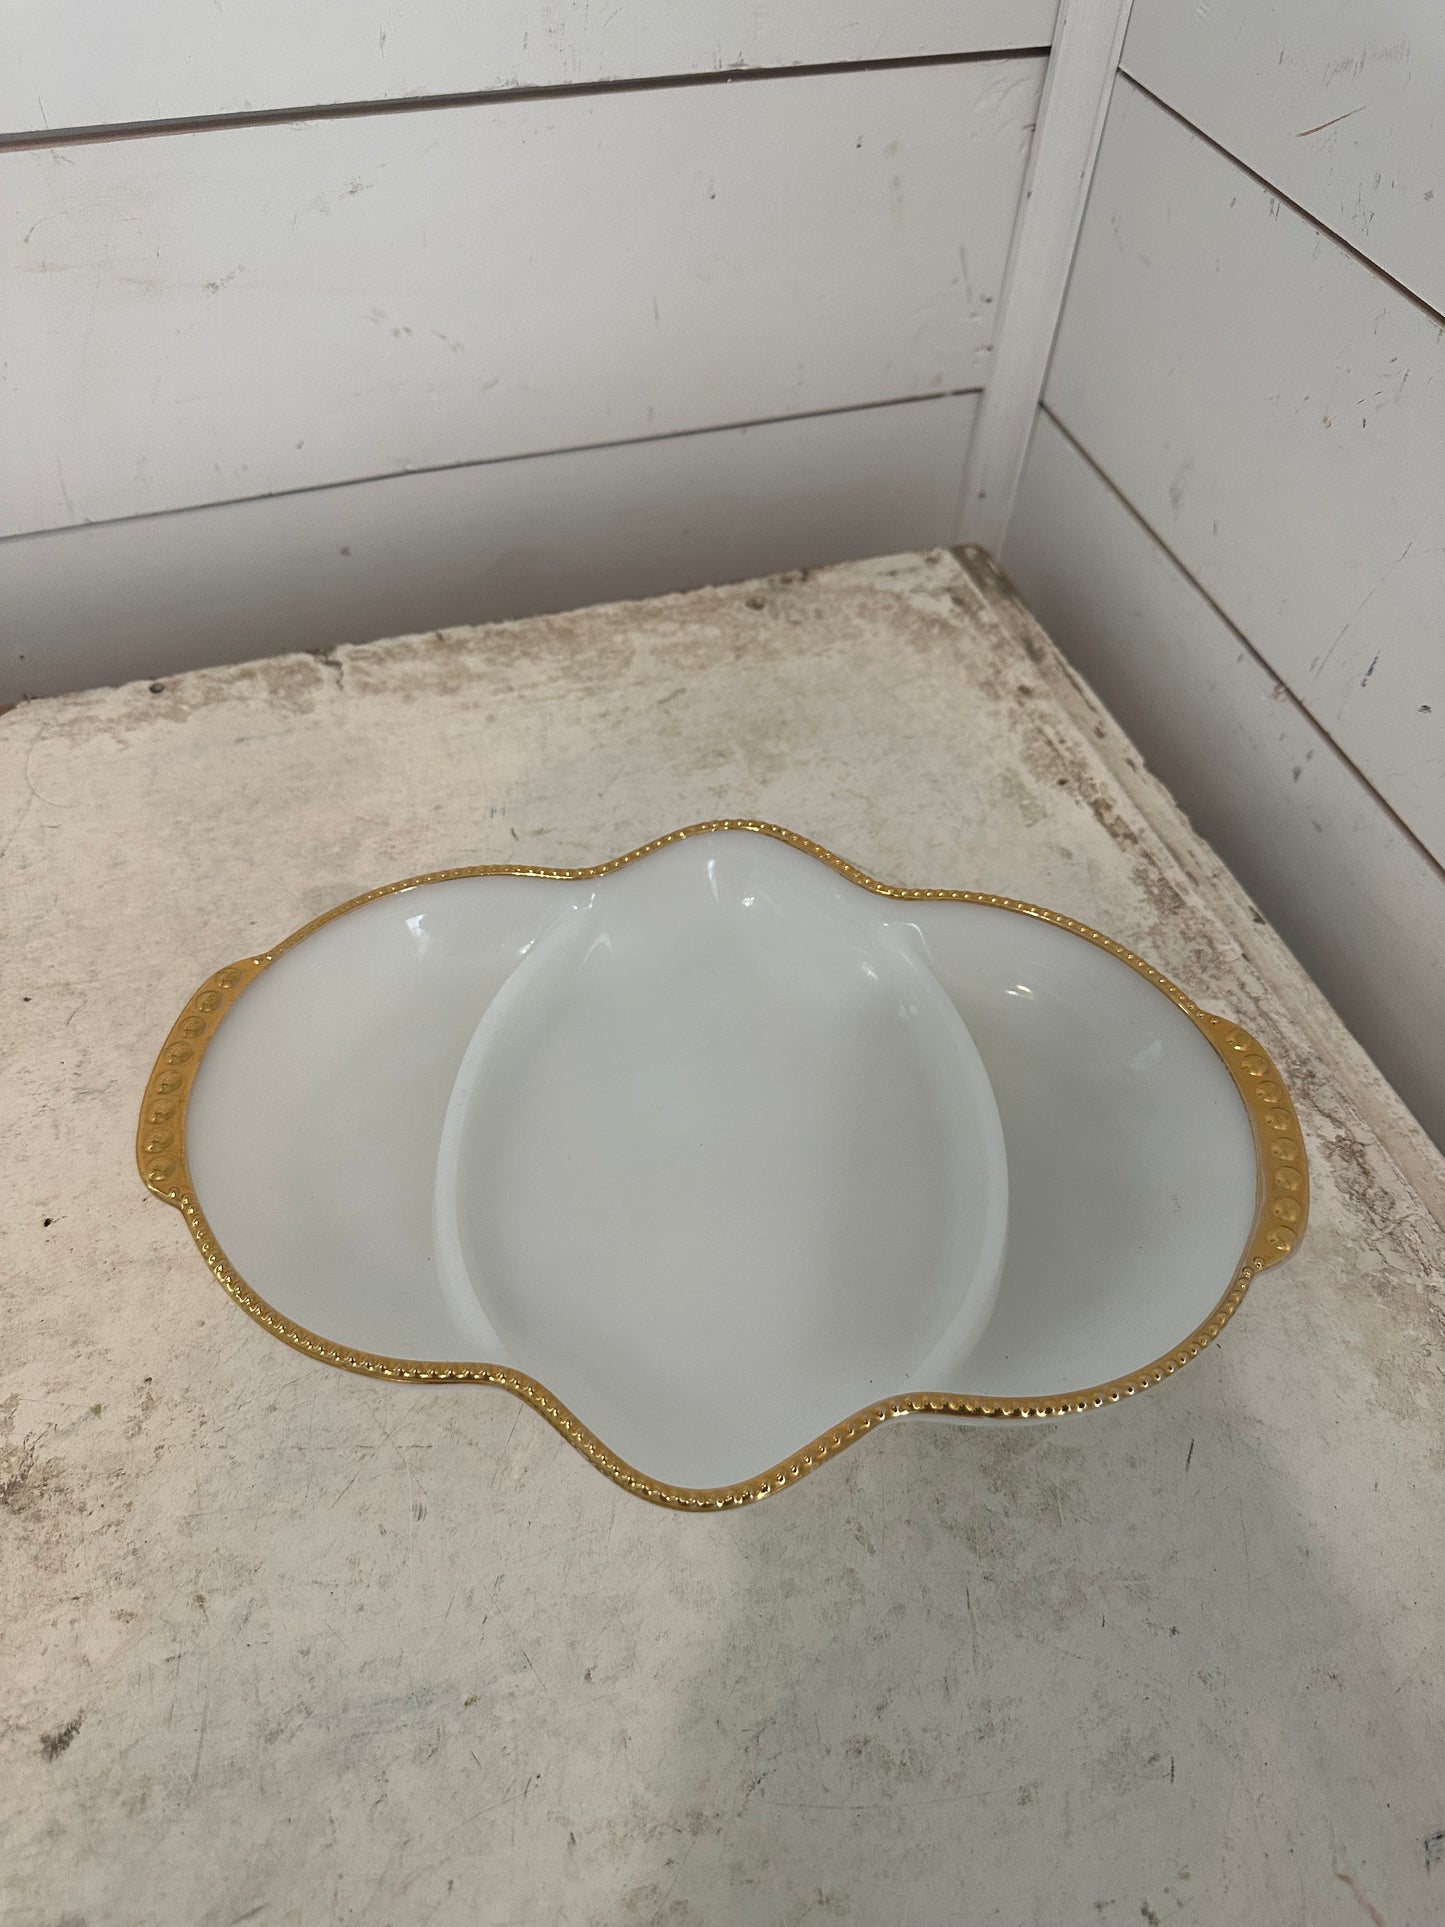 Anchor Hocking Fire King Milk White Glass Gold Trim Divided Dish